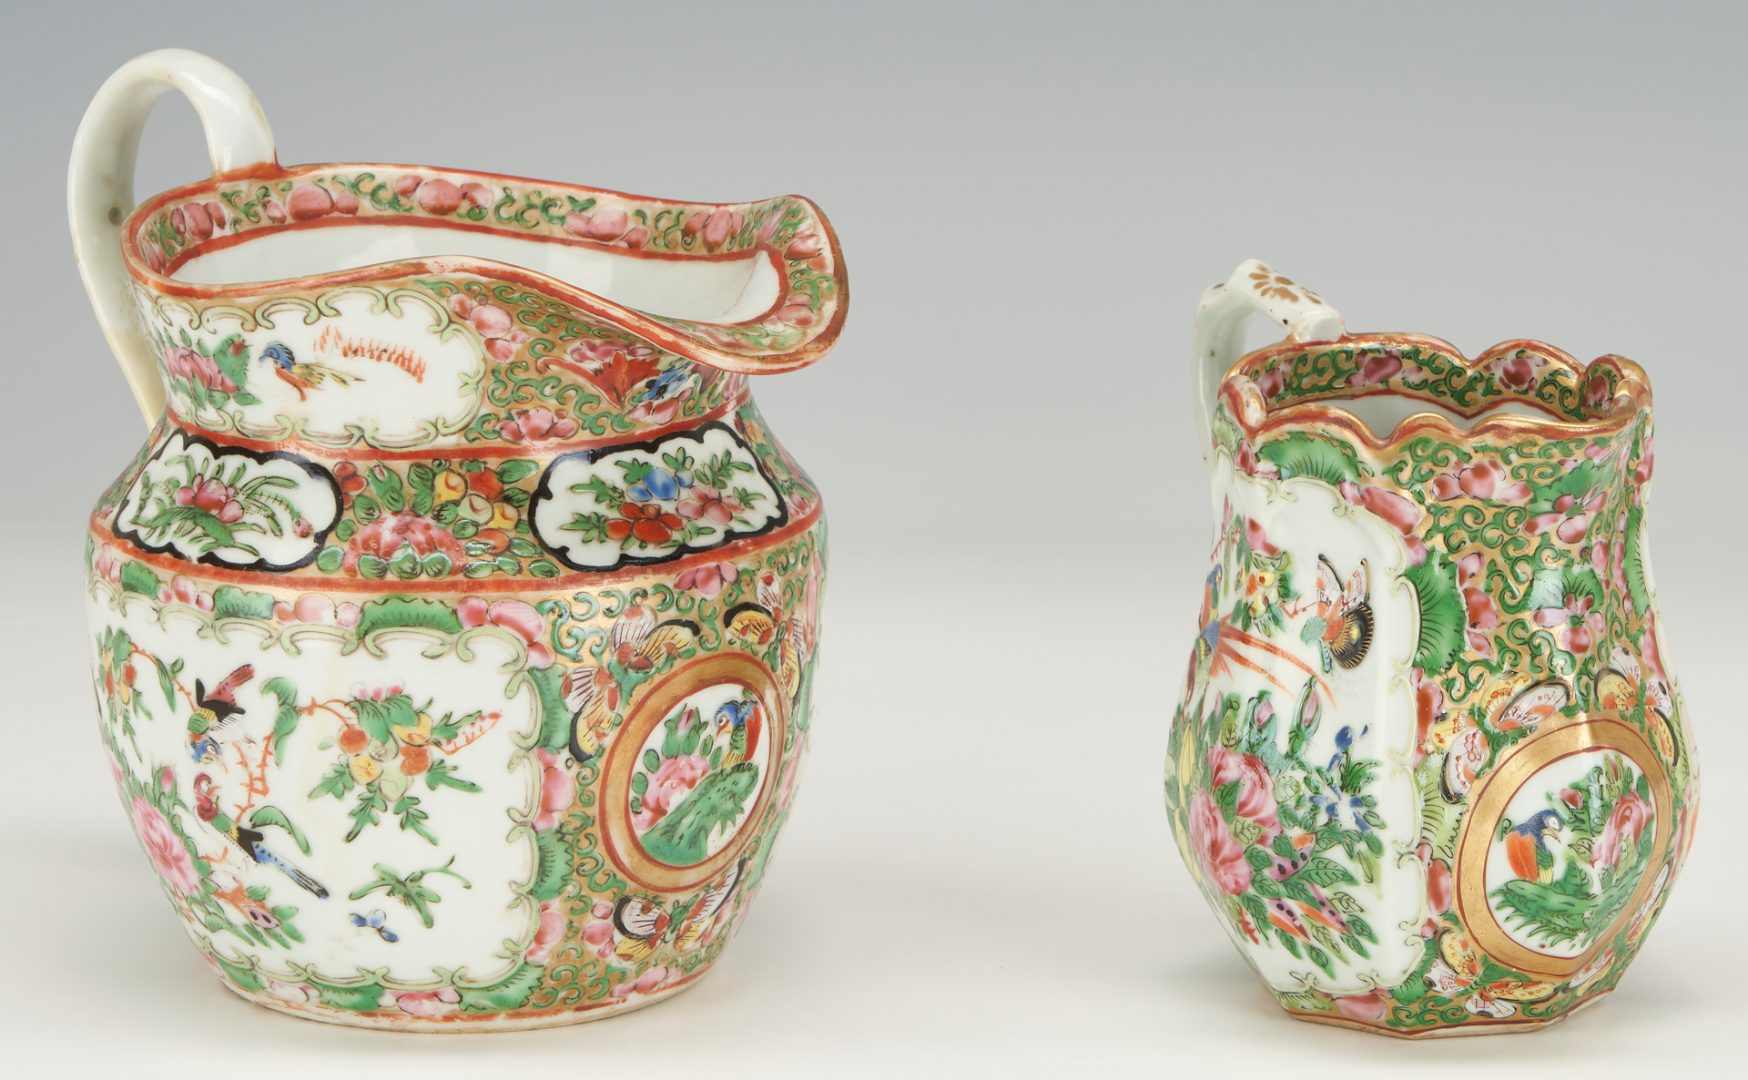 Lot 1037: Nine (9) pieces of Chinese Rose Medallion Porcelain, incl. Pitcher & Plates